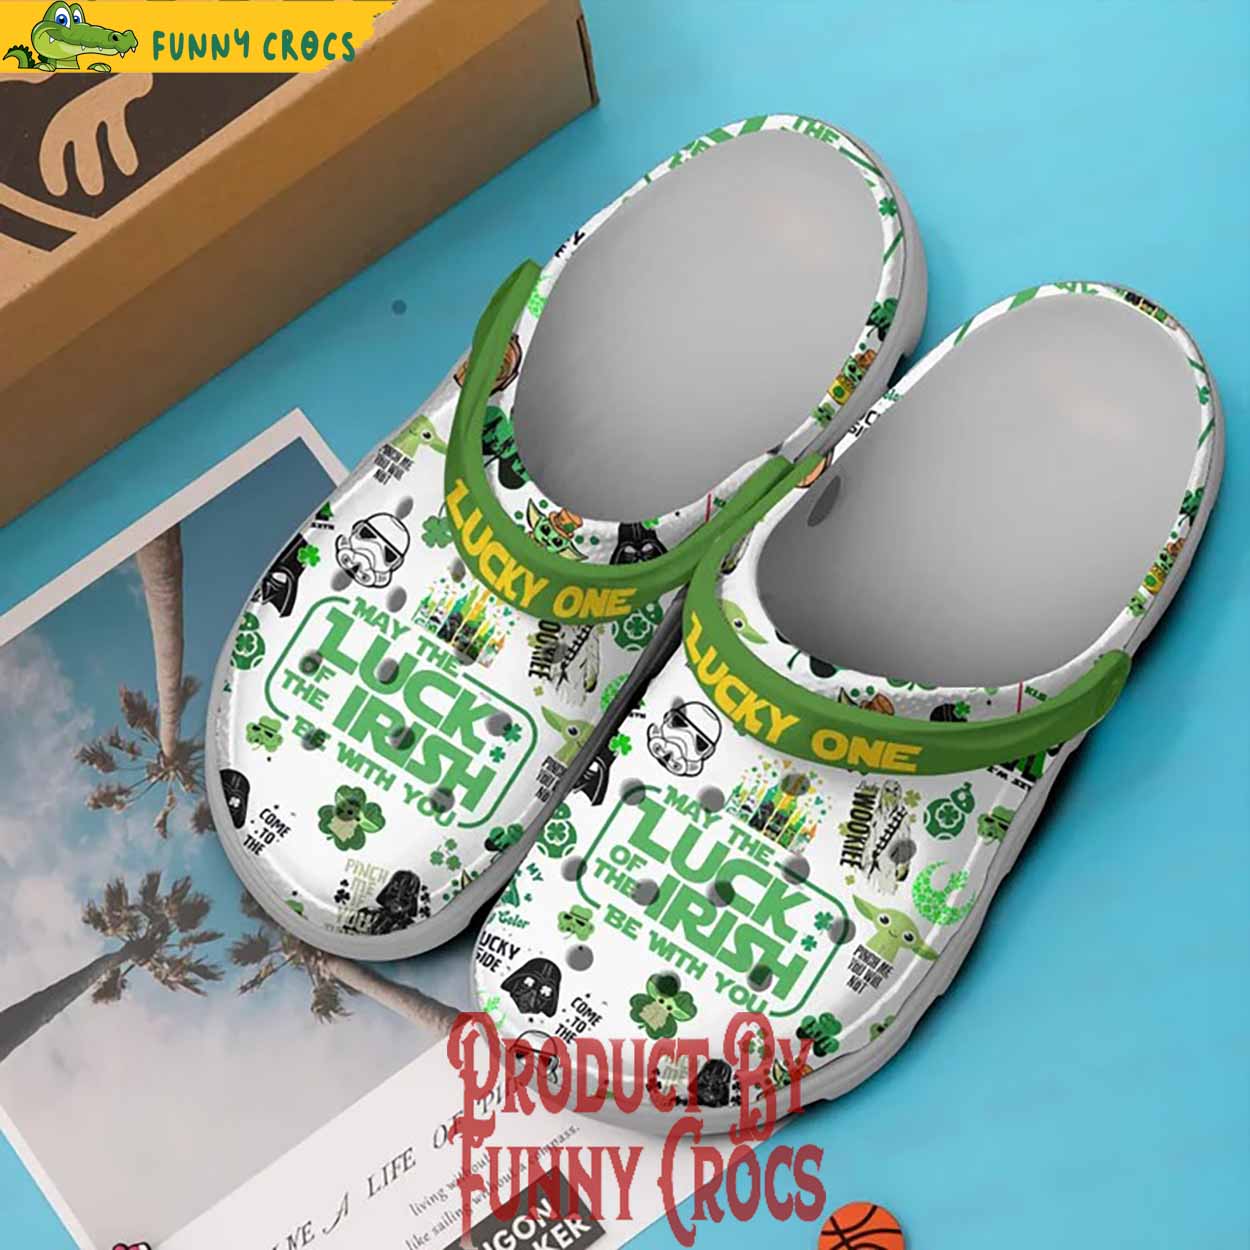 May The Luck Of The Irish Be With You Star Wars St. Patrick's Day Crocs Shoes